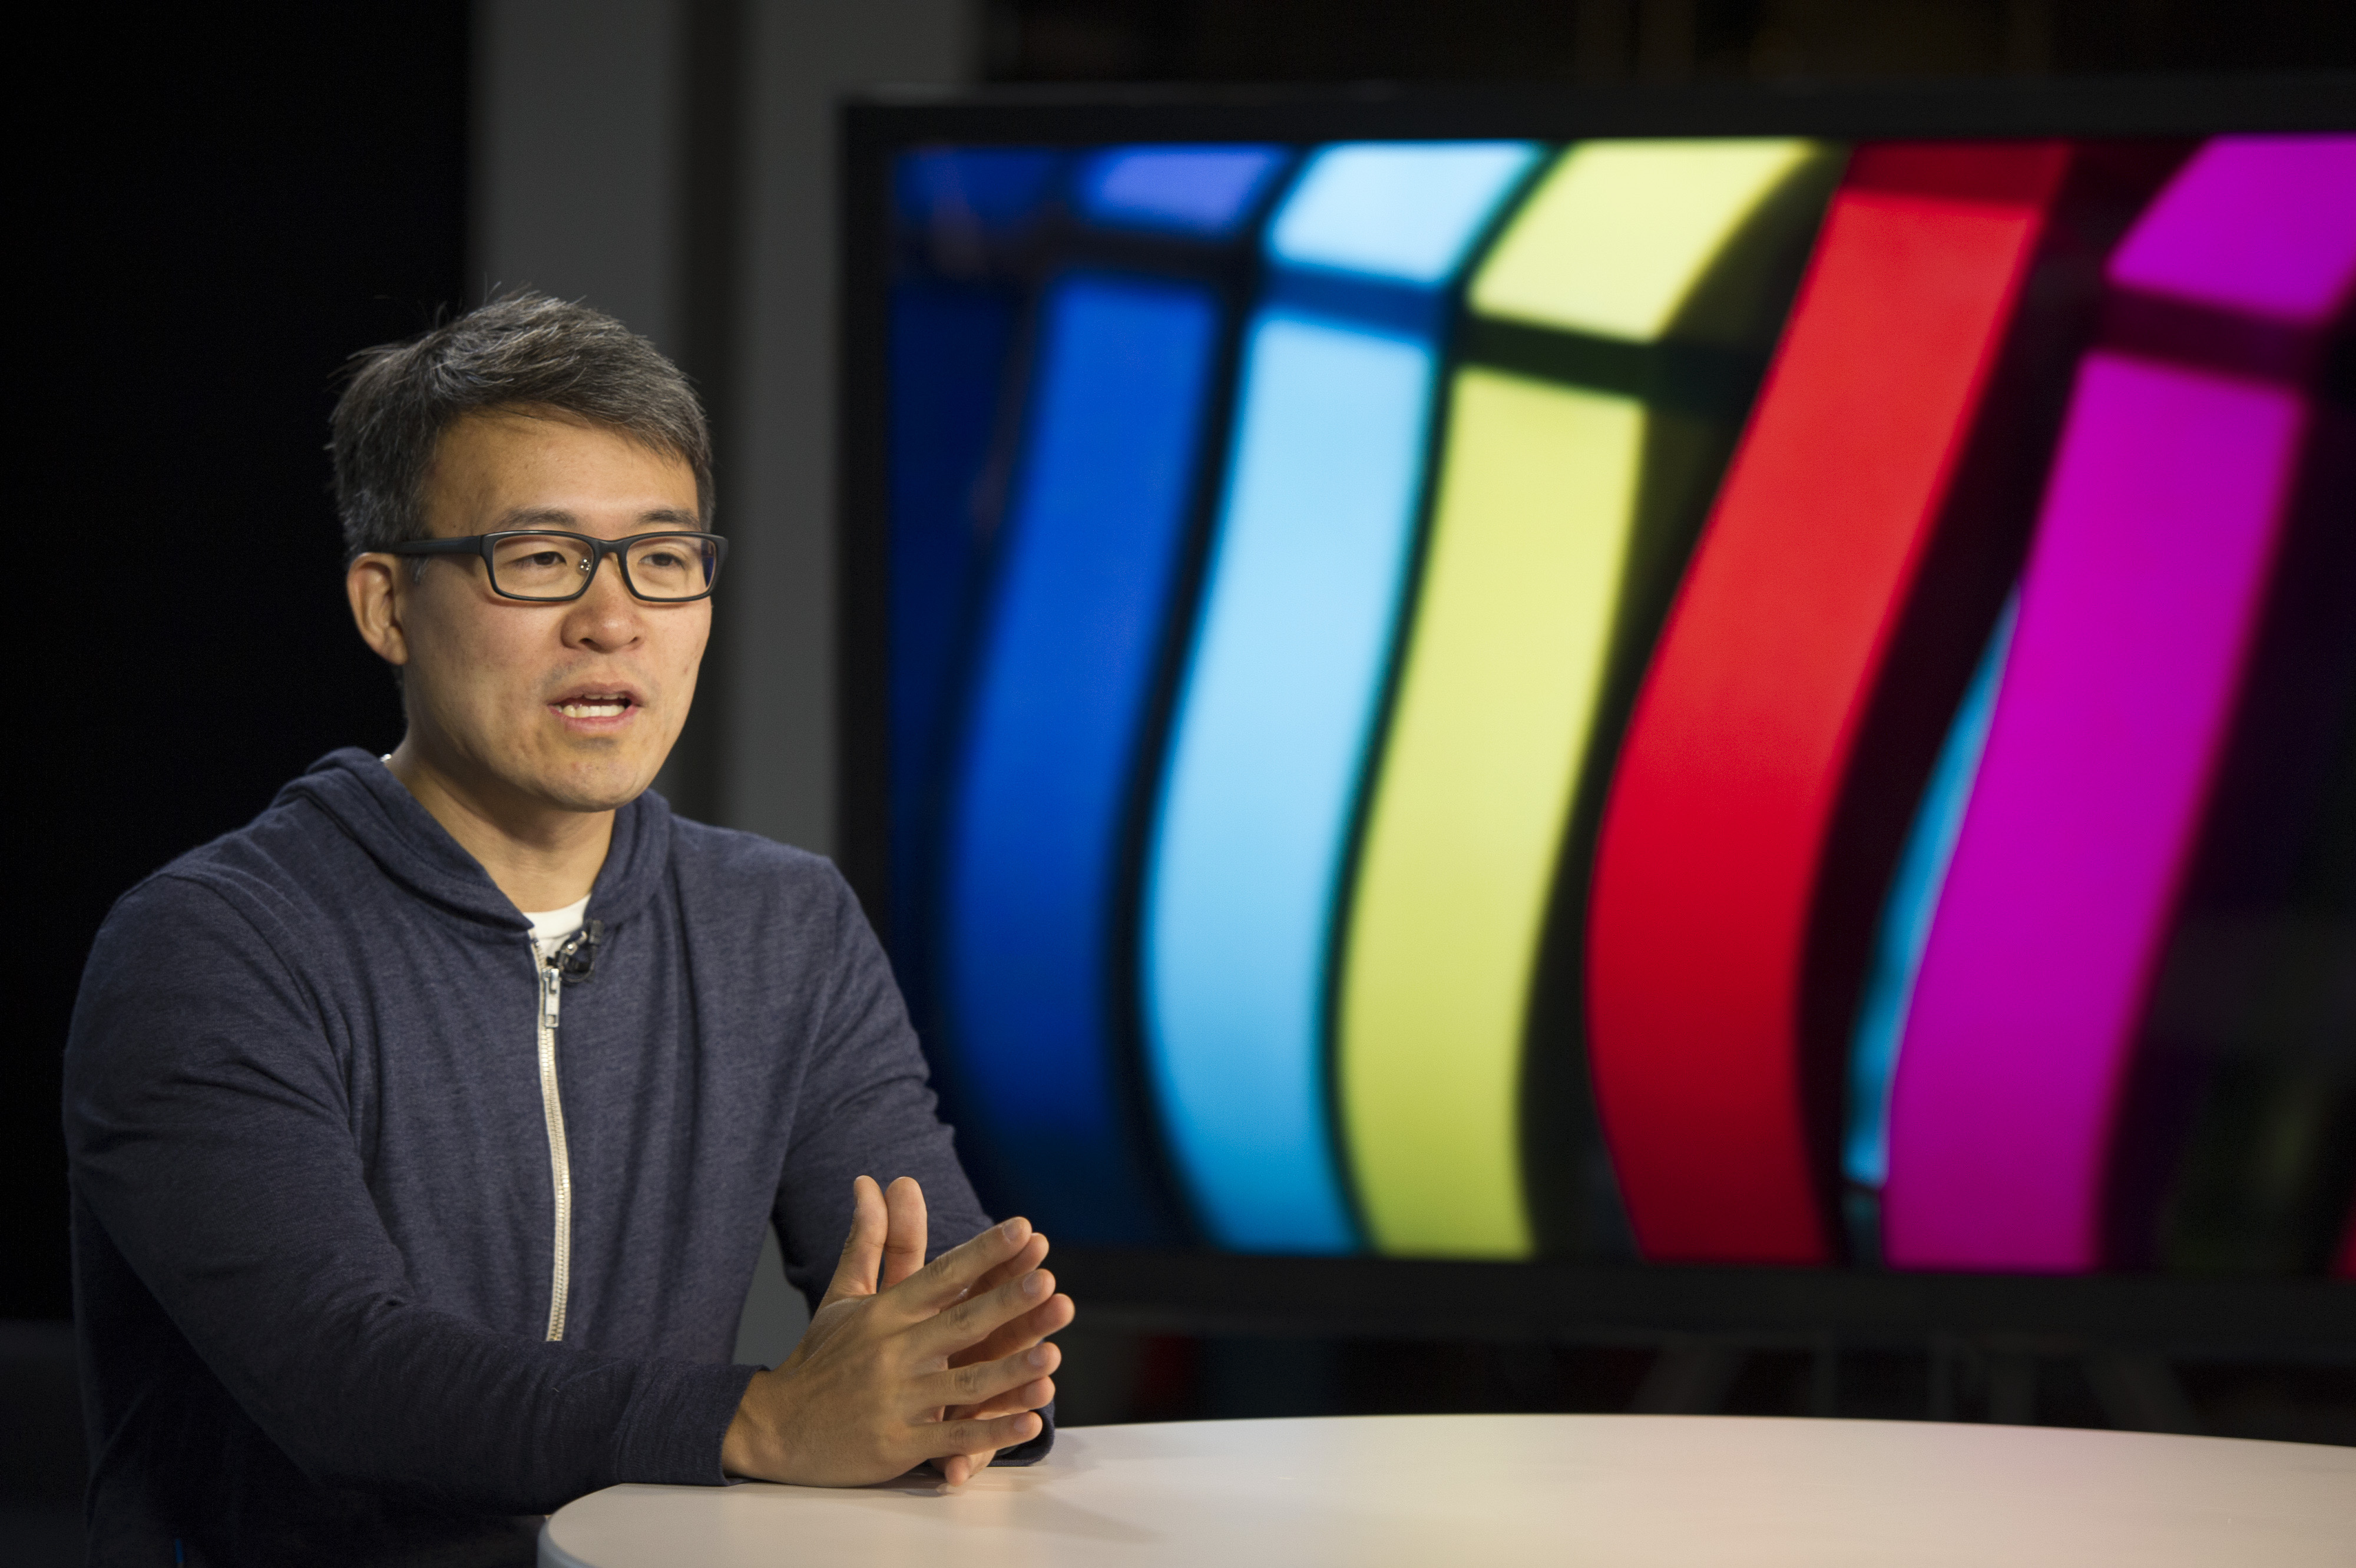 Fitbit Inc. Chief Executive Officer James Park Interview